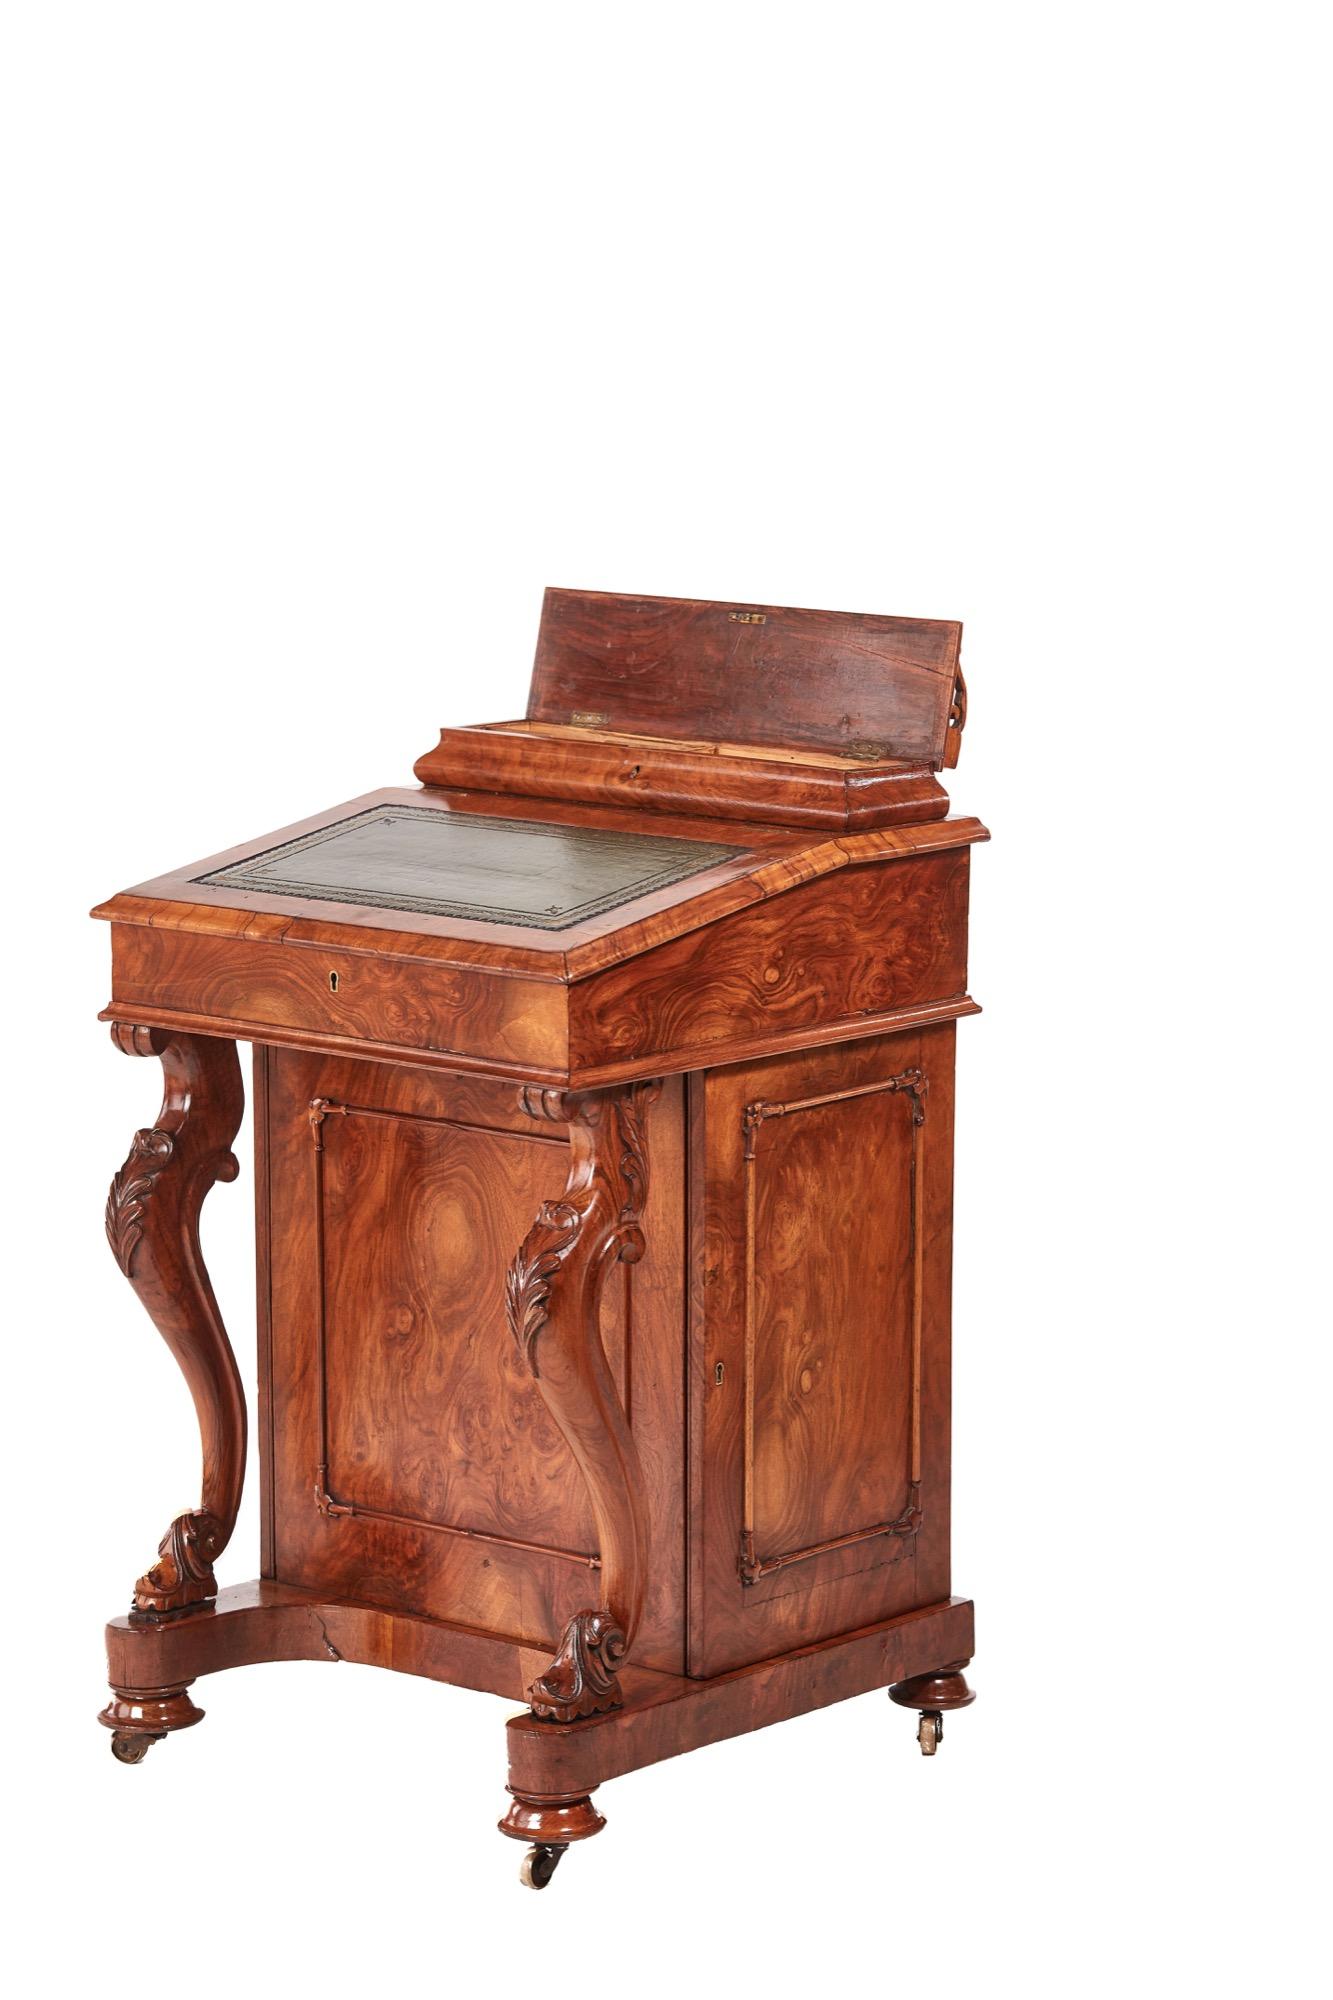 Antique 19th century Victorian antique burr walnut freestanding Davenport having a lift up lid and a writing slope both with fitted interiors, lovely burr walnut front panel, carved cabriole legs, walnut door to the right side opens to reveal four